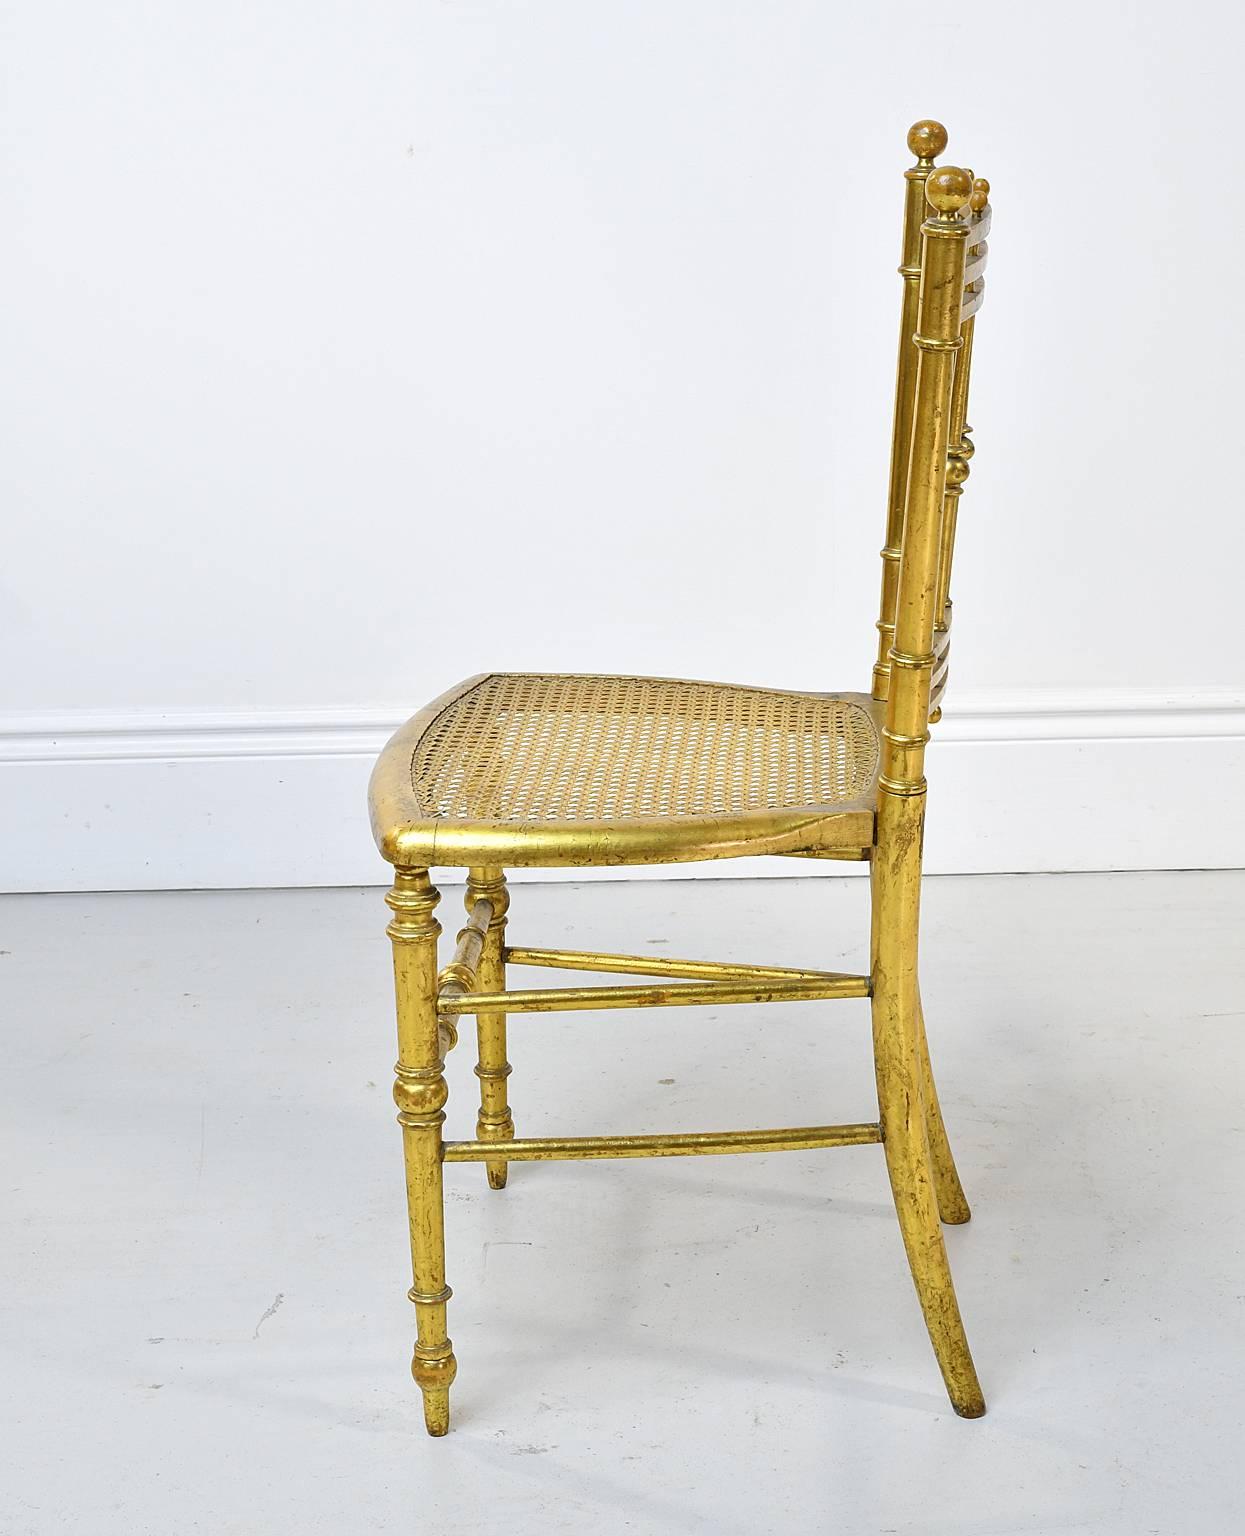 Turned Early 20th Century French Belle Époque Chair in Gilt-Wood with Cane Seat. For Sale